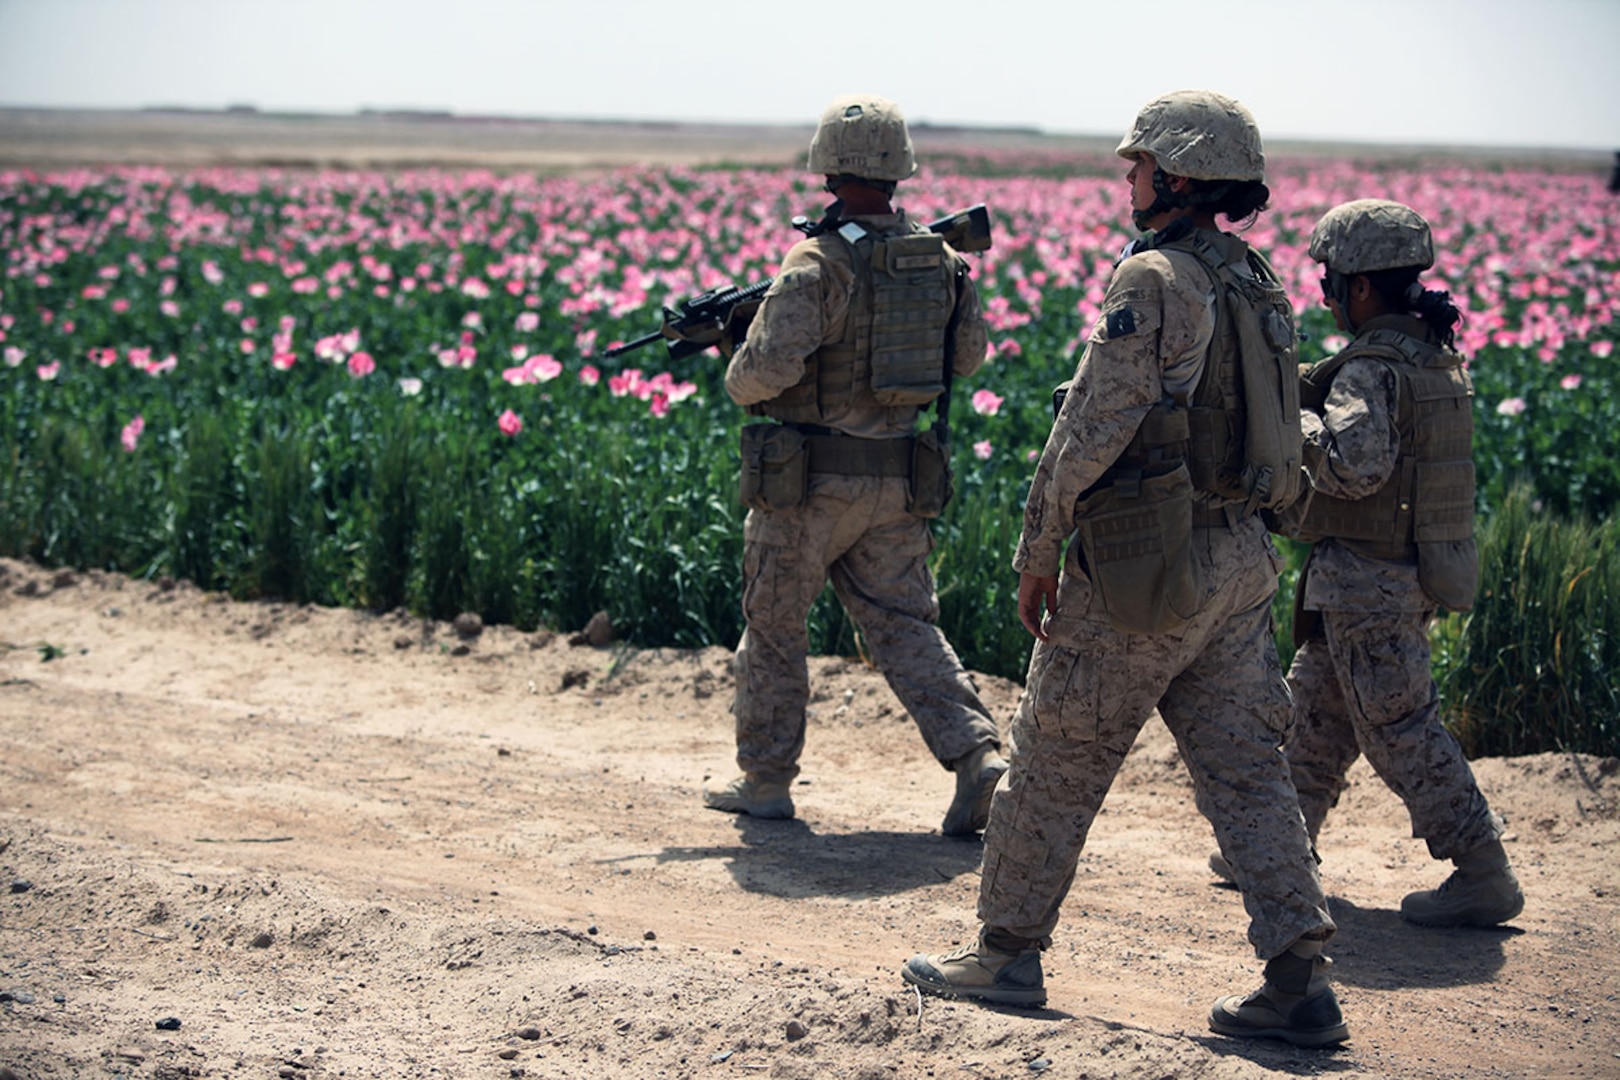 U.S. Marines assigned to the female engagement team (FET) of I Marine Expeditionary Force (Forward) conduct a patrol alongside a poppy field while visiting Afghan settlements in Boldak, Afghanistan, April 5, 2010. The FET, which is deployed in support of the International Security Assistance Force, is in the area to engage with local women in an effort to gain cultural awareness and ascertain family needs. (DoD photo by Cpl. Lindsay L. Sayres, U.S. Marine Corps/Released)